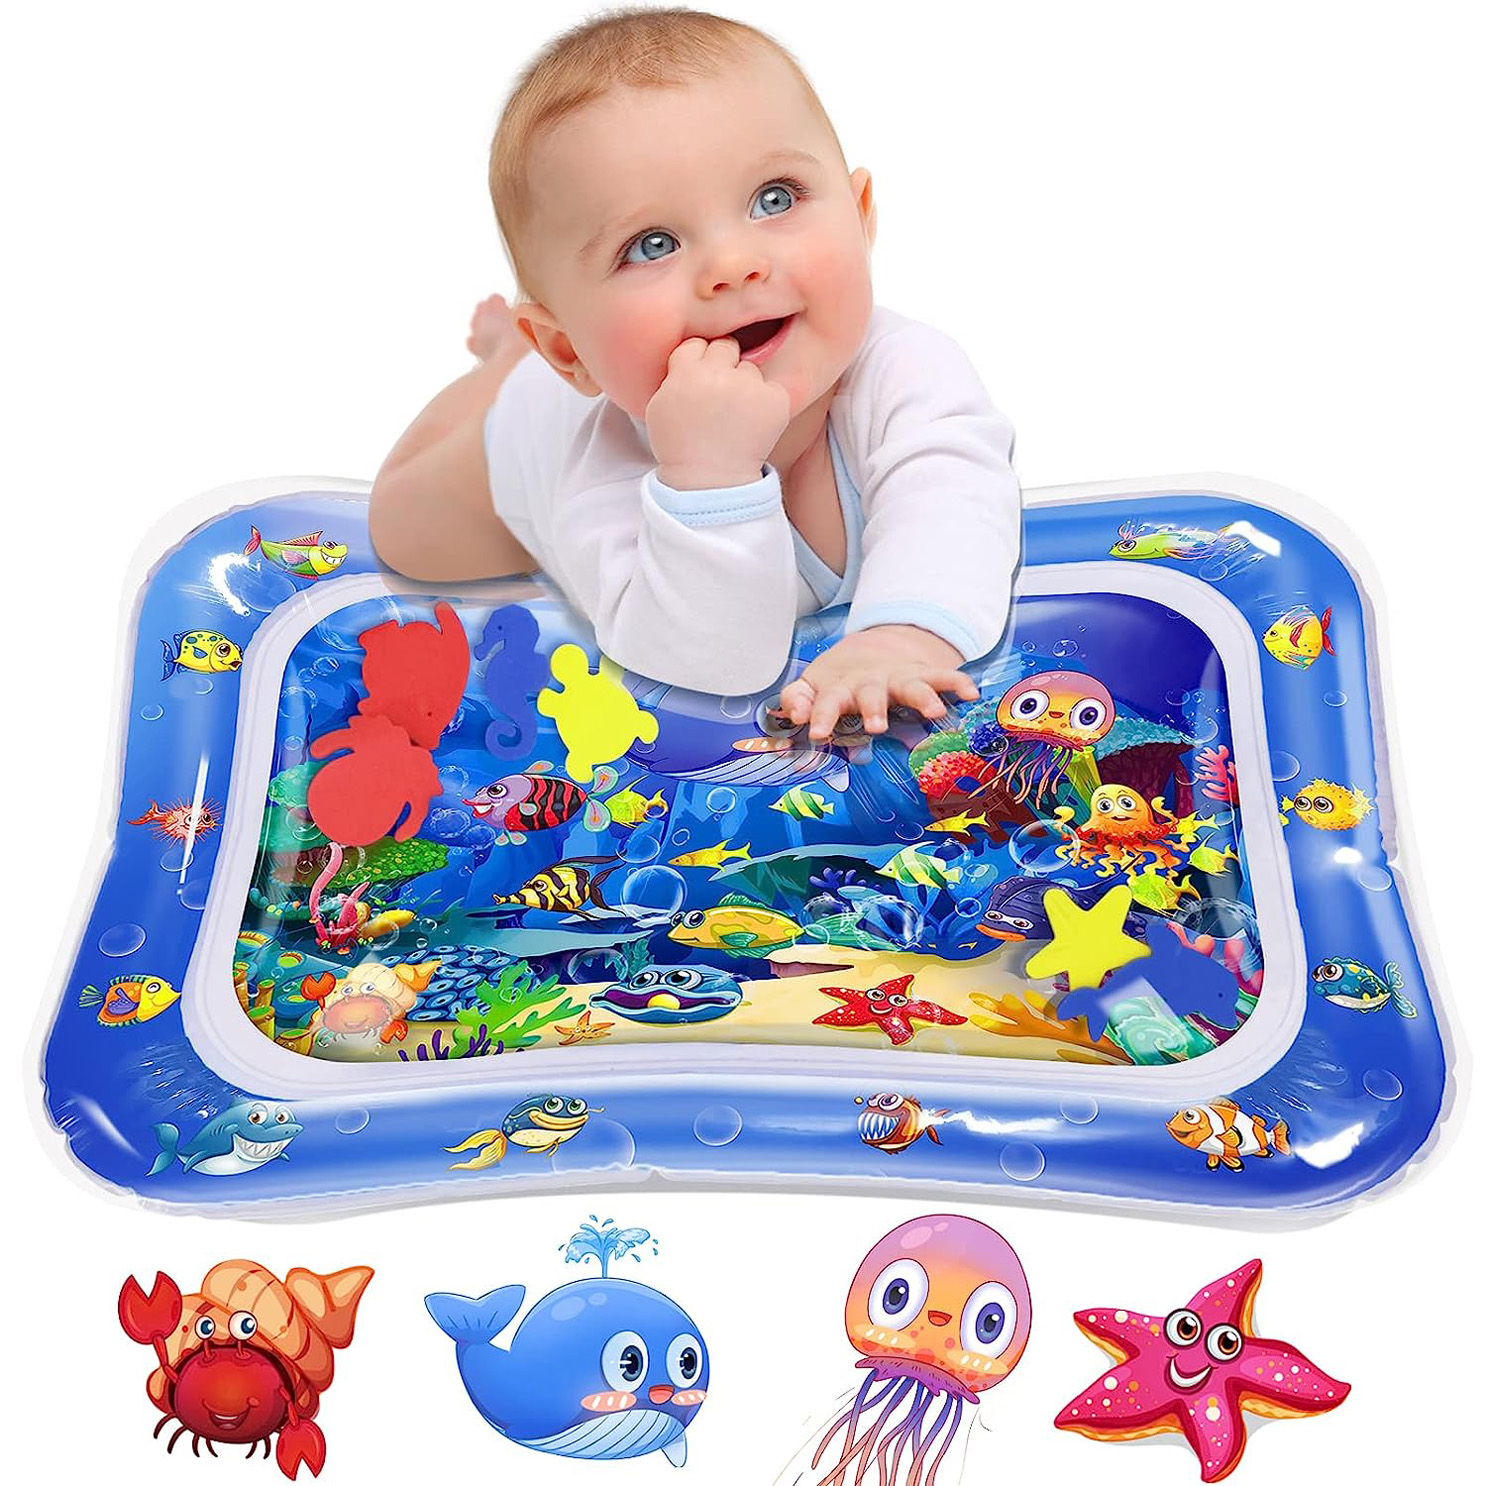 Infinno Inflatable Tummy Time Mat Premium Baby Water Play Mat for Baby.